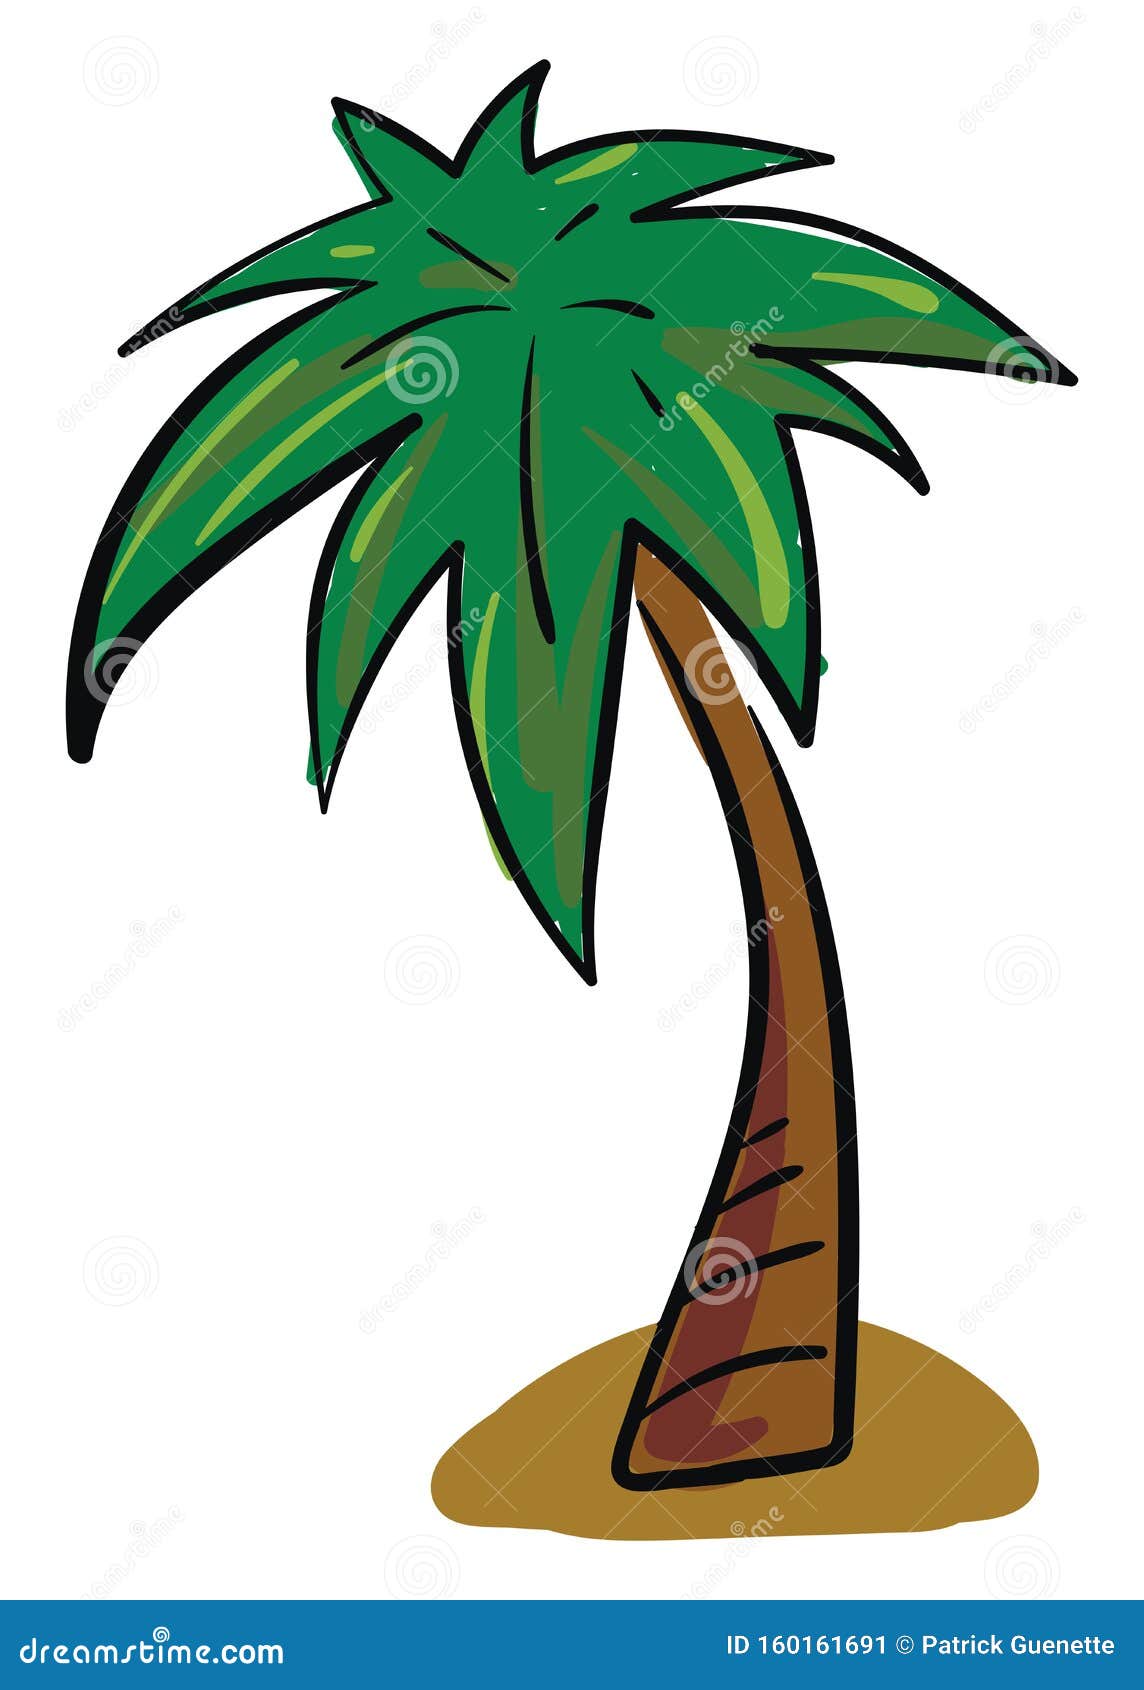 Clipart of a Palm Tree Above the Soil Over a White Background, Vector ...